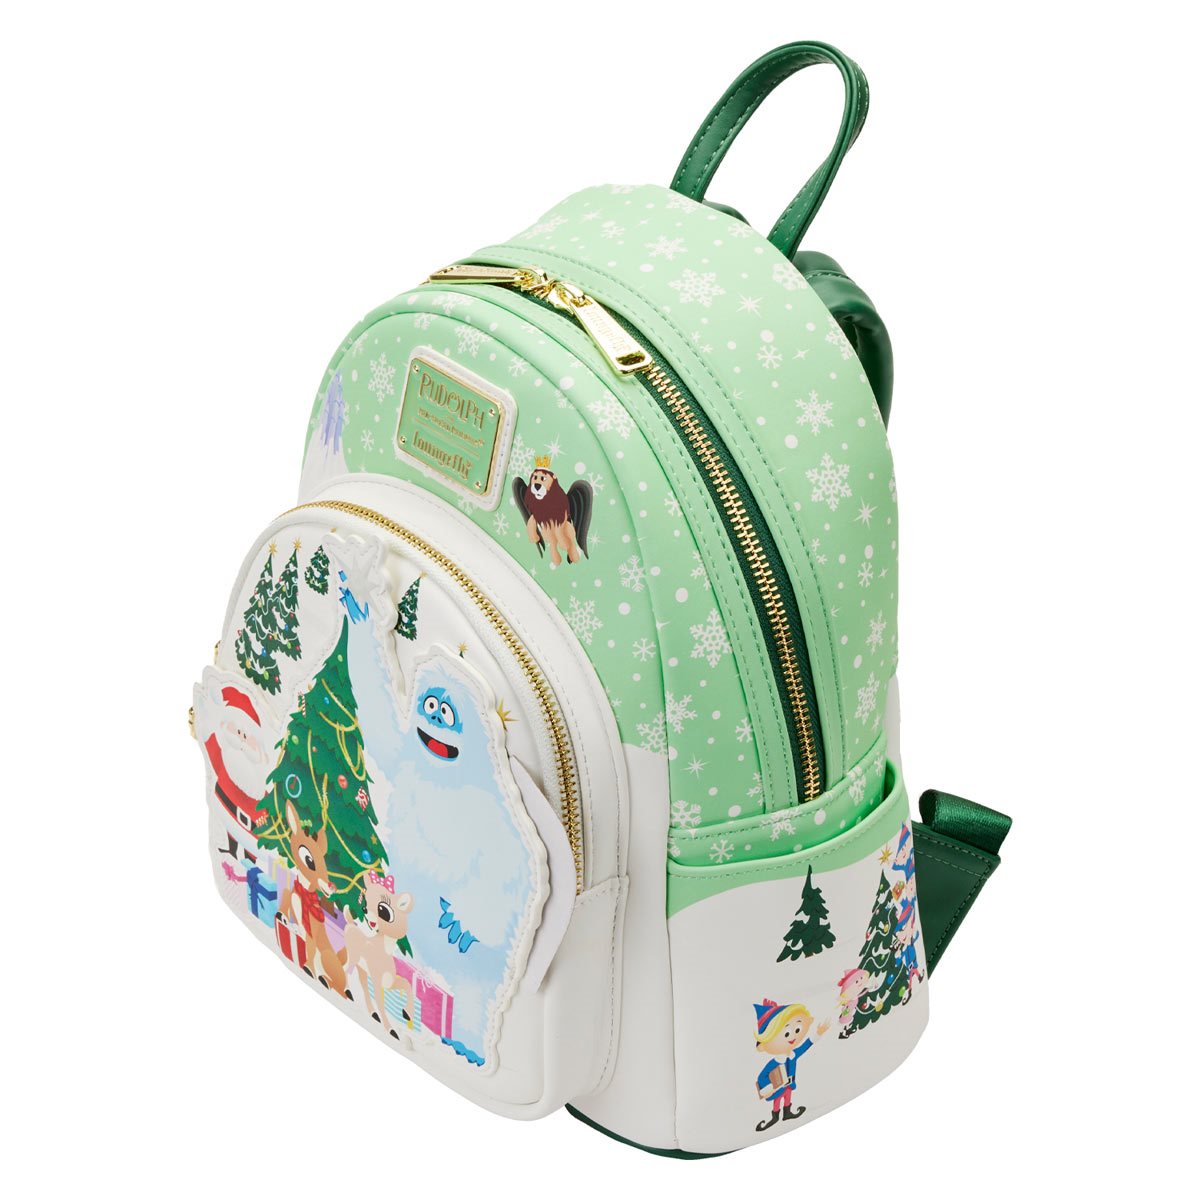 Loungefly Rudolph the Red-Nosed Reindeer Light-Up Mini-Backpack